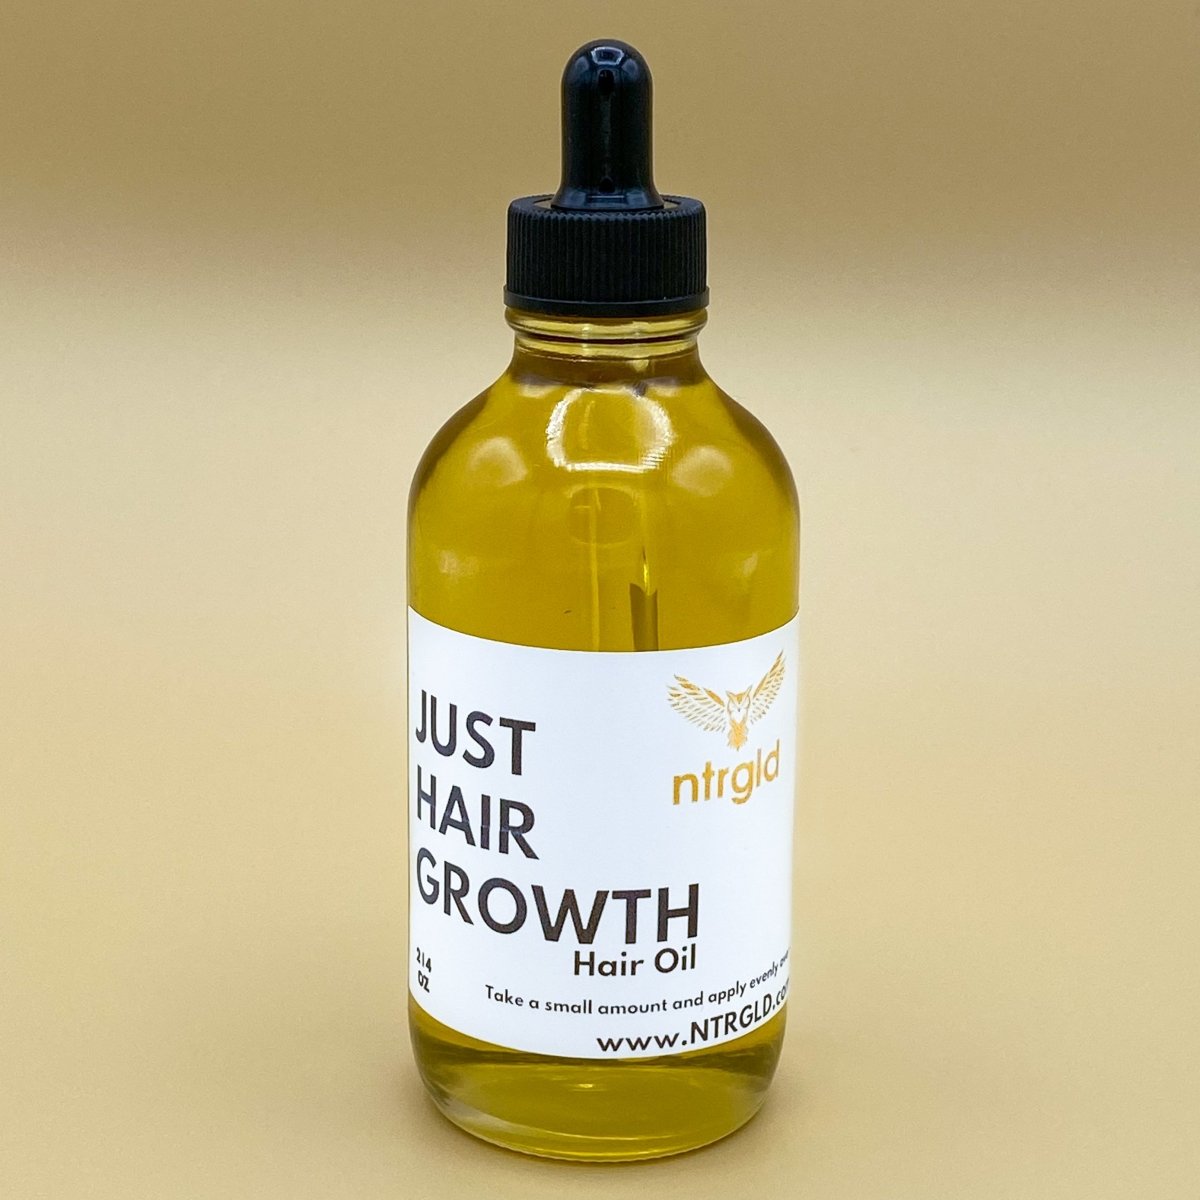 JUST HAIR GROWTH OIL - Improve Your Lackluster Edges